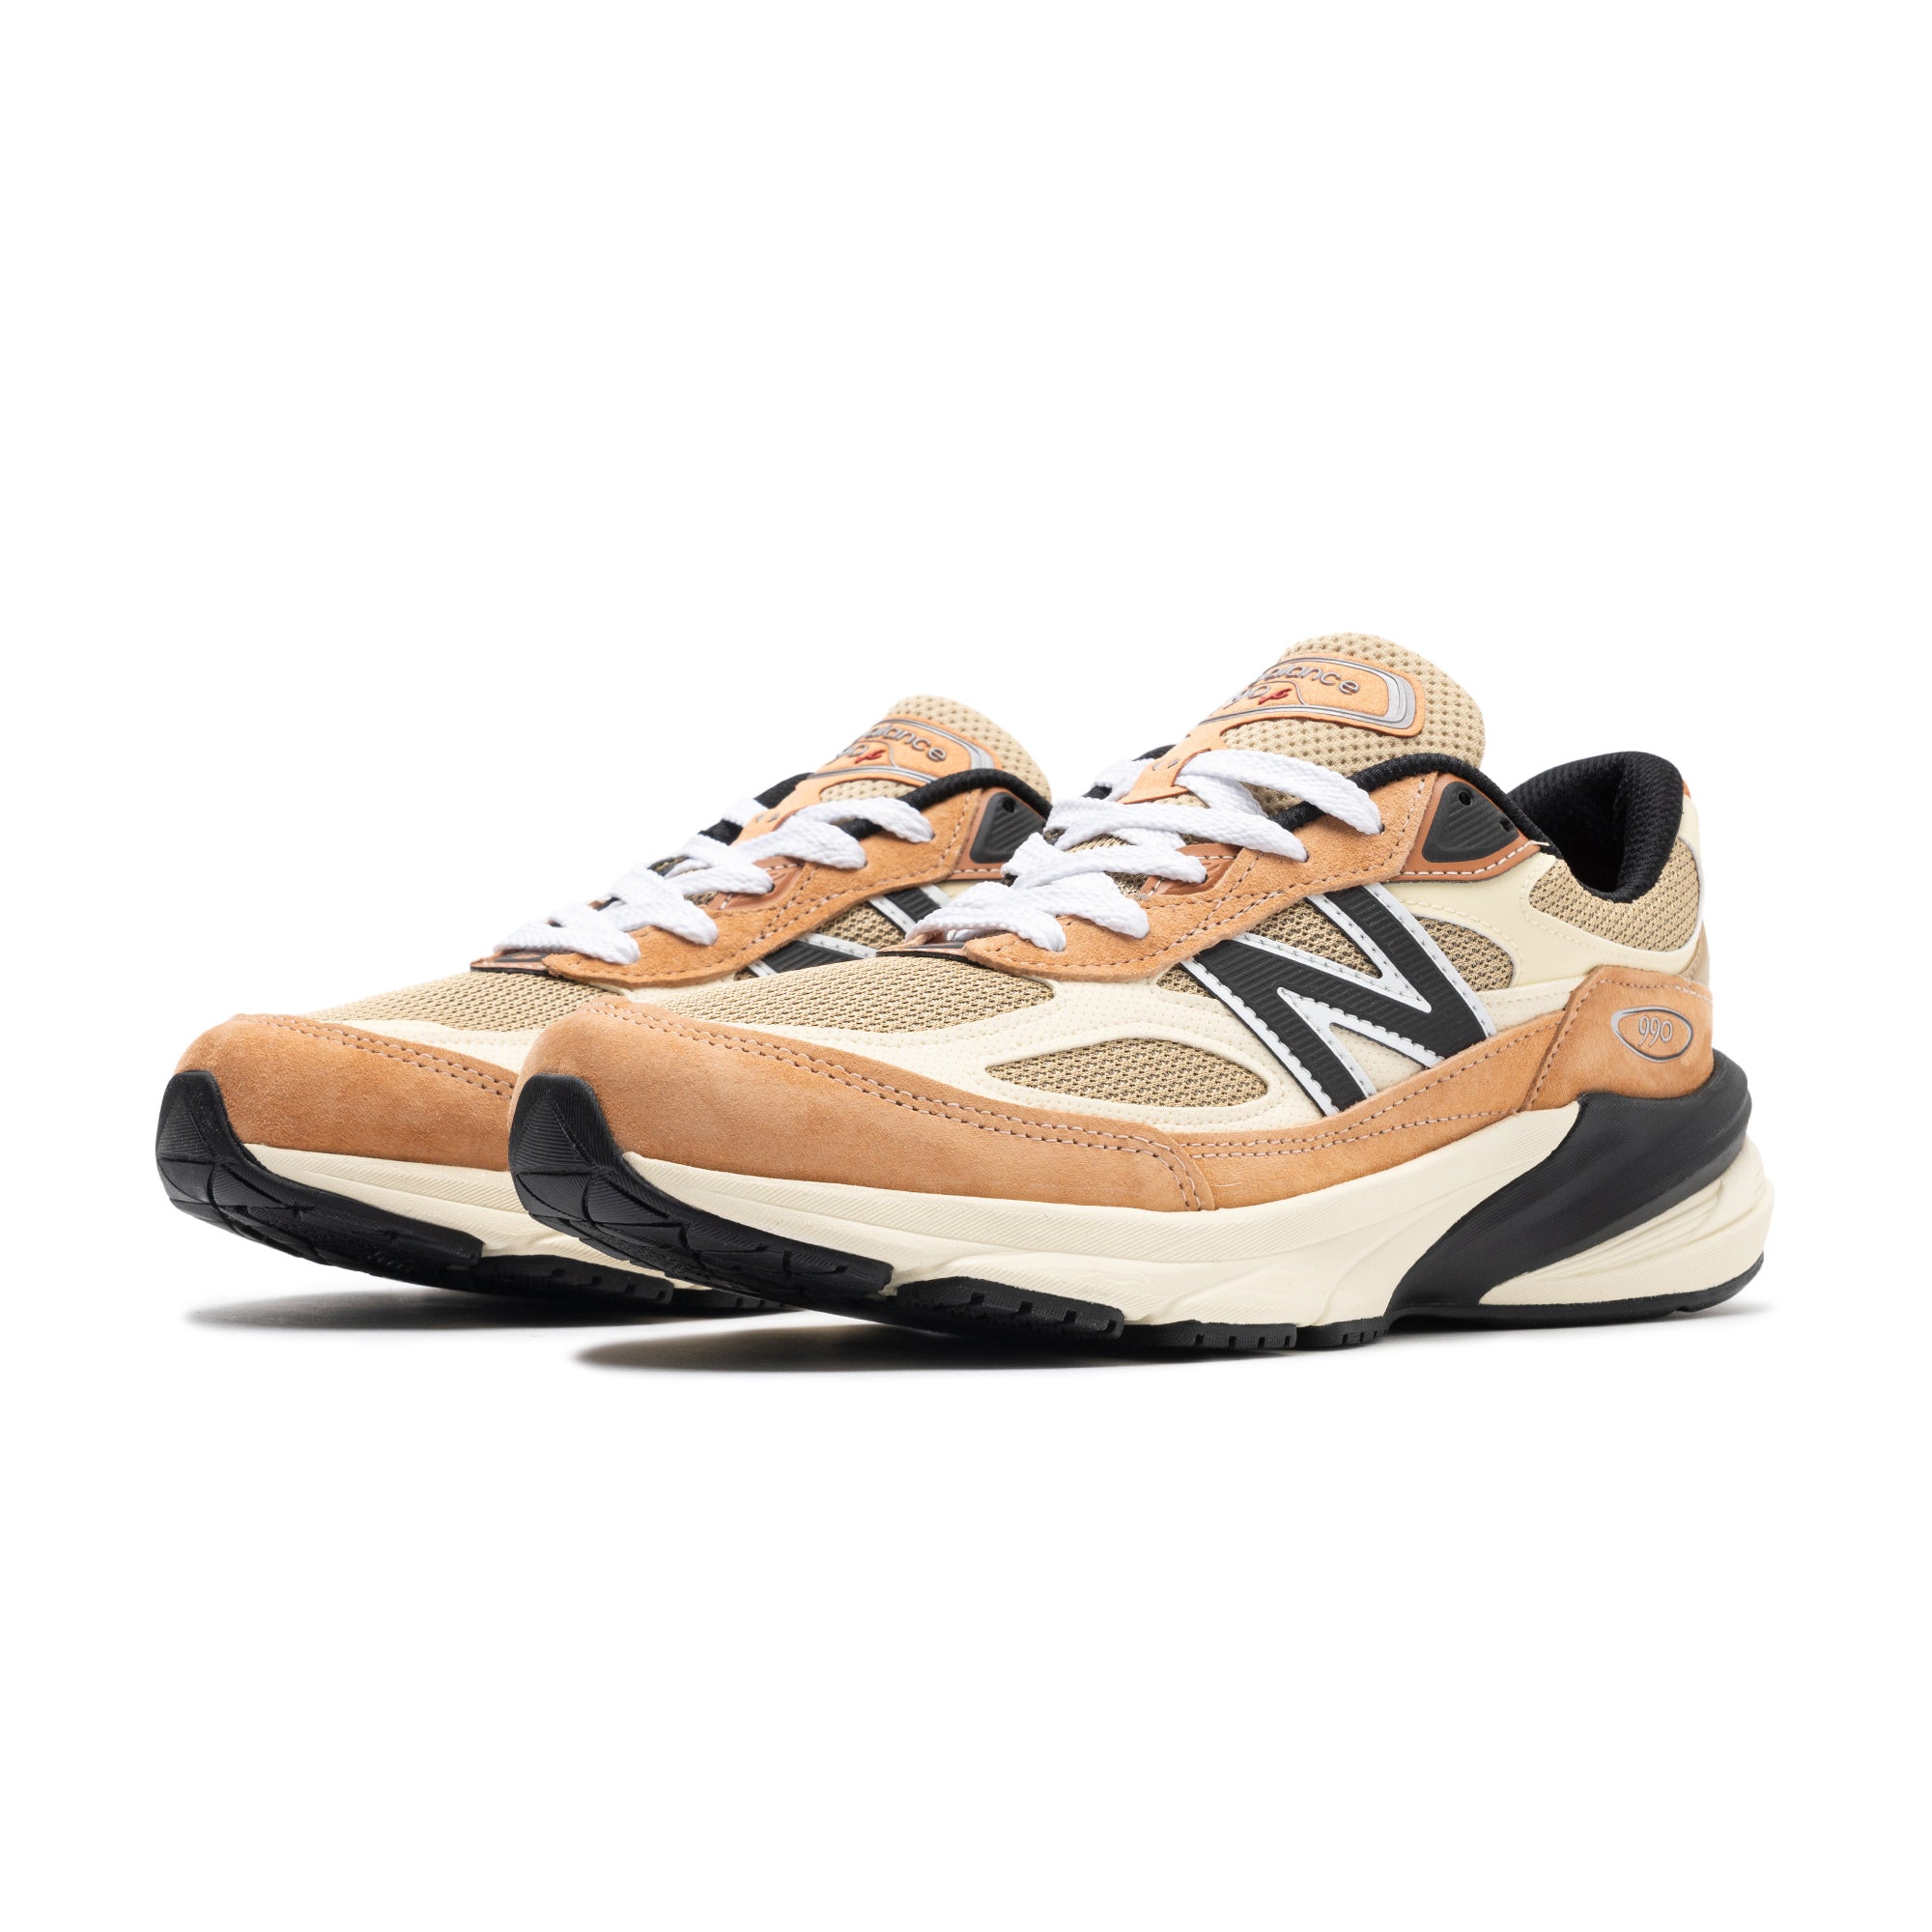 nordstrom x new balance 576 made usa pack now available